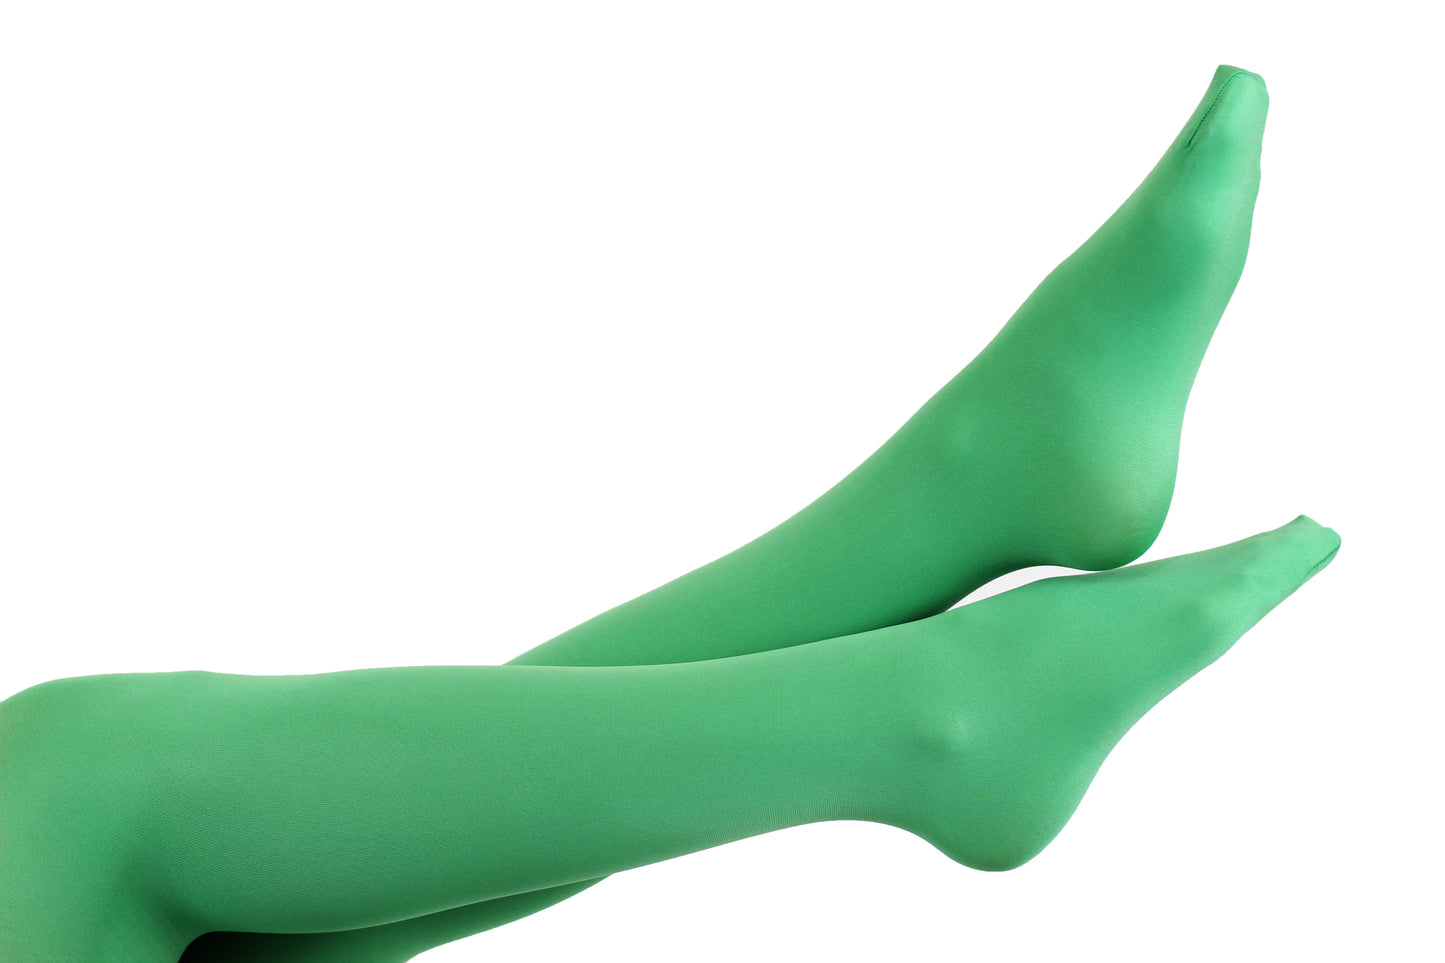 What are SMART TIGHTS - quickly biodegrading hosiery?